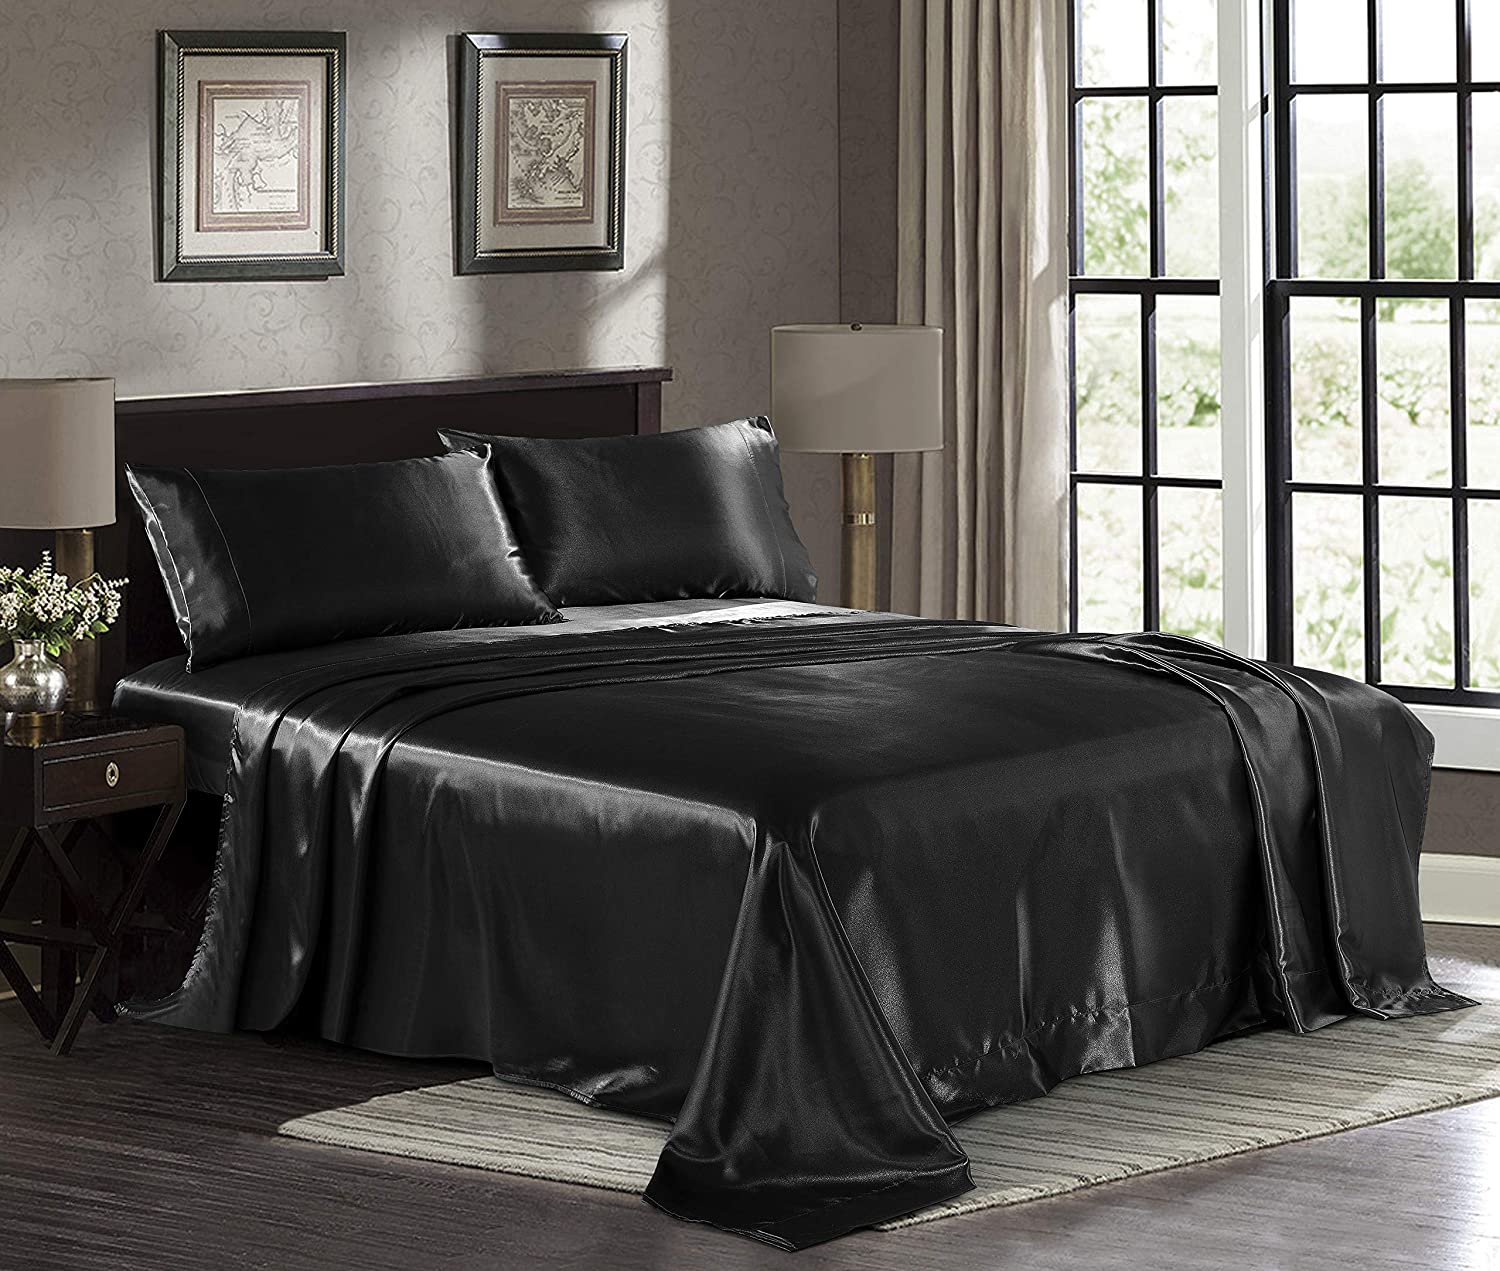 PURE BEDDING Silky Satin Sheets, 4-Piece